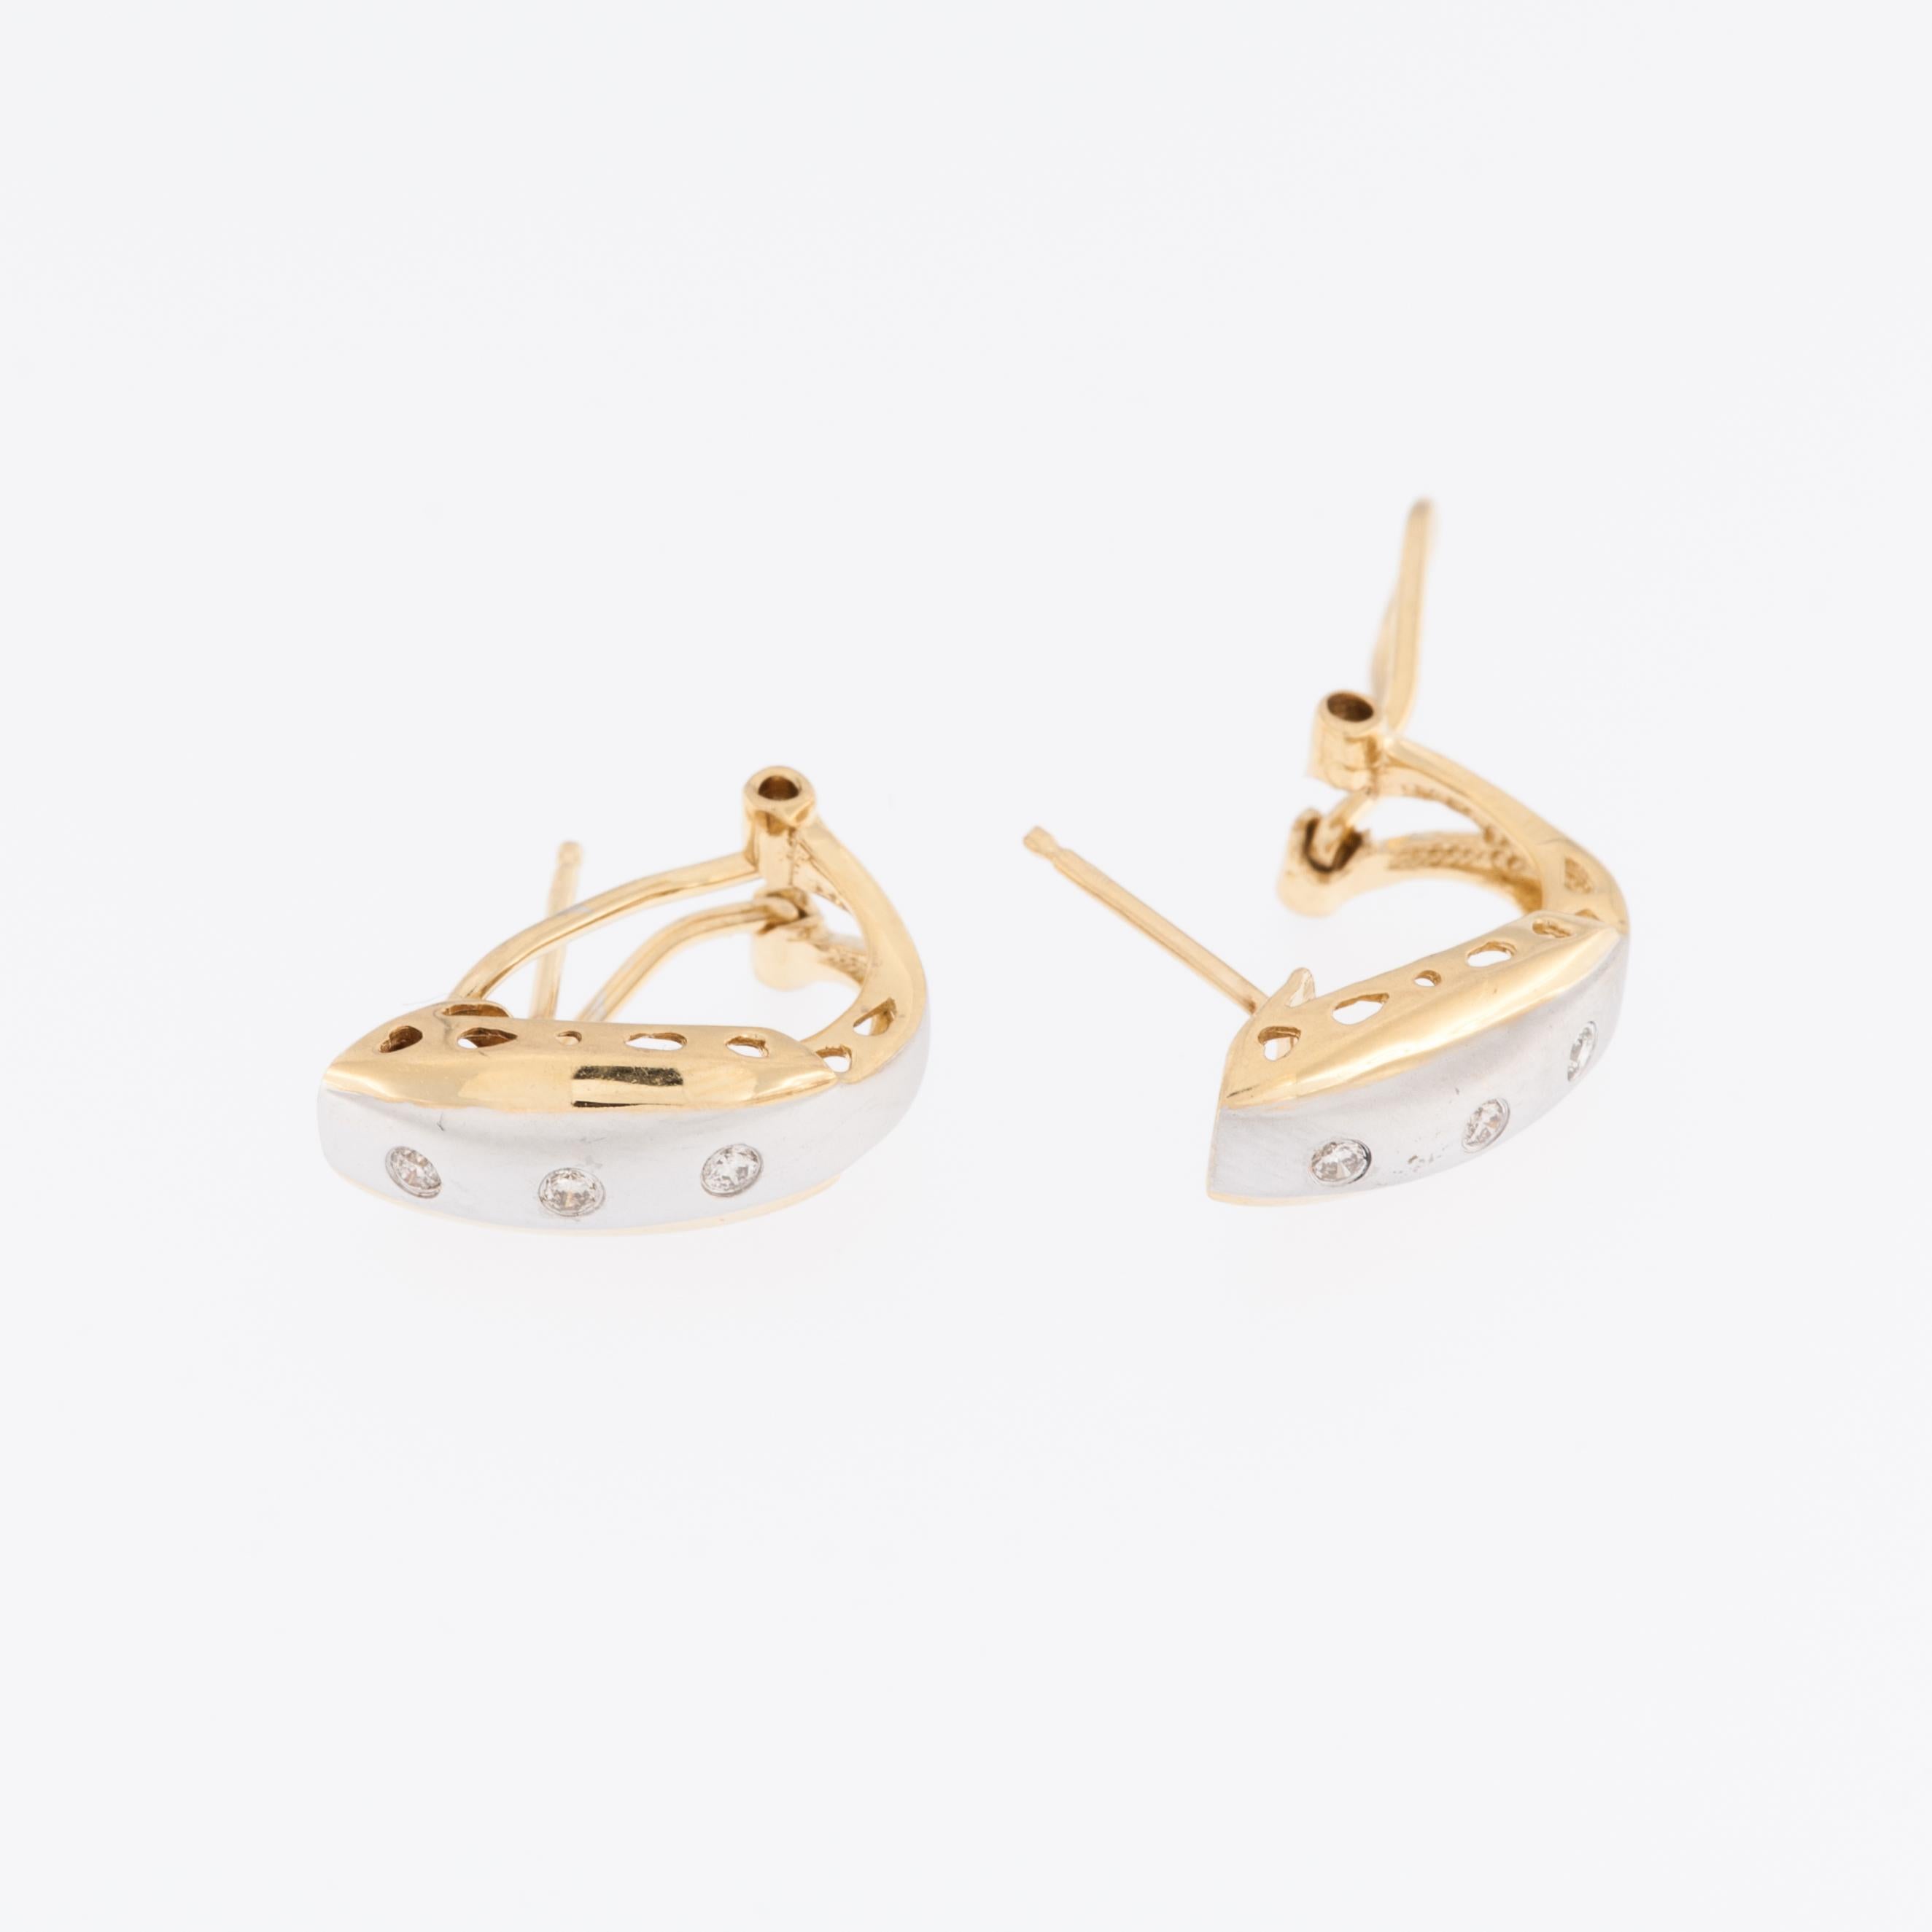 The Modern 18kt Yellow and White Gold Earrings are a sophisticated and elegant piece of jewelry. The meticulous craftsmanship is evident in every detail, making these earrings a true work of art.

The design showcases a seamless fusion of two